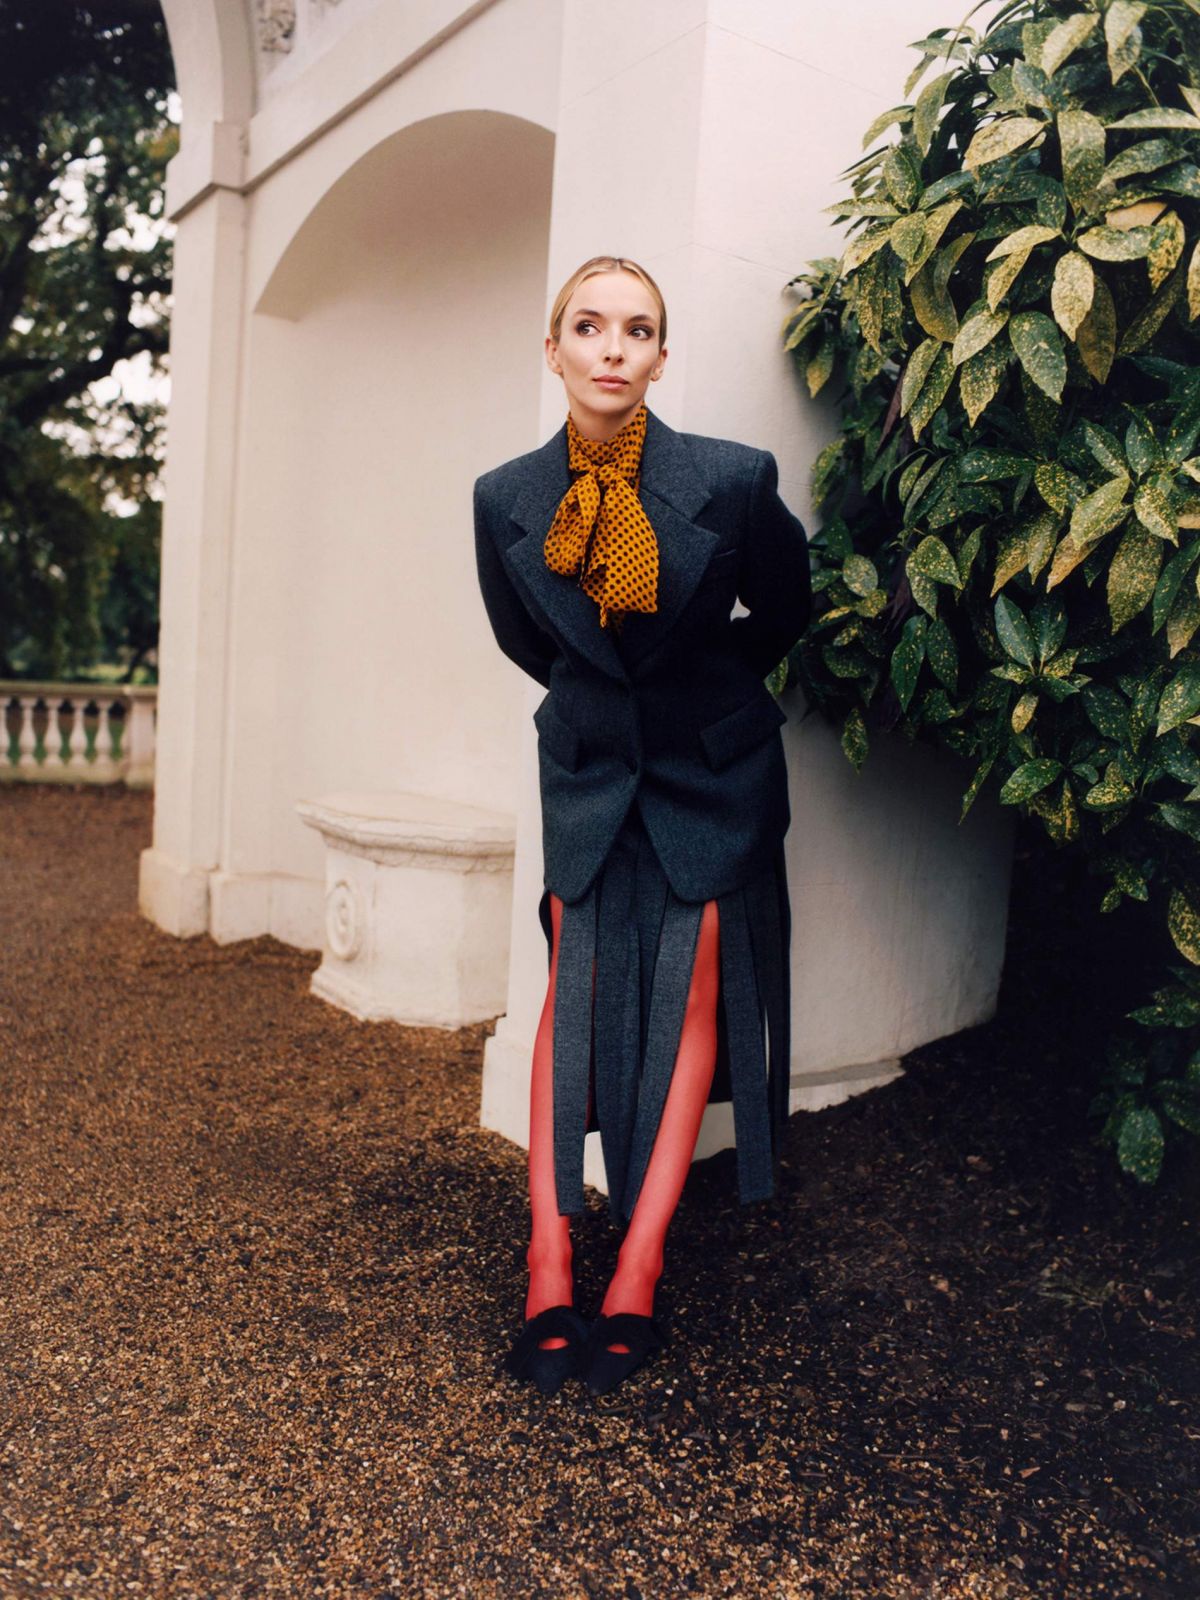 jodie-comer-for-the-edit-by-net-a-porter-november-2020-3.jpg